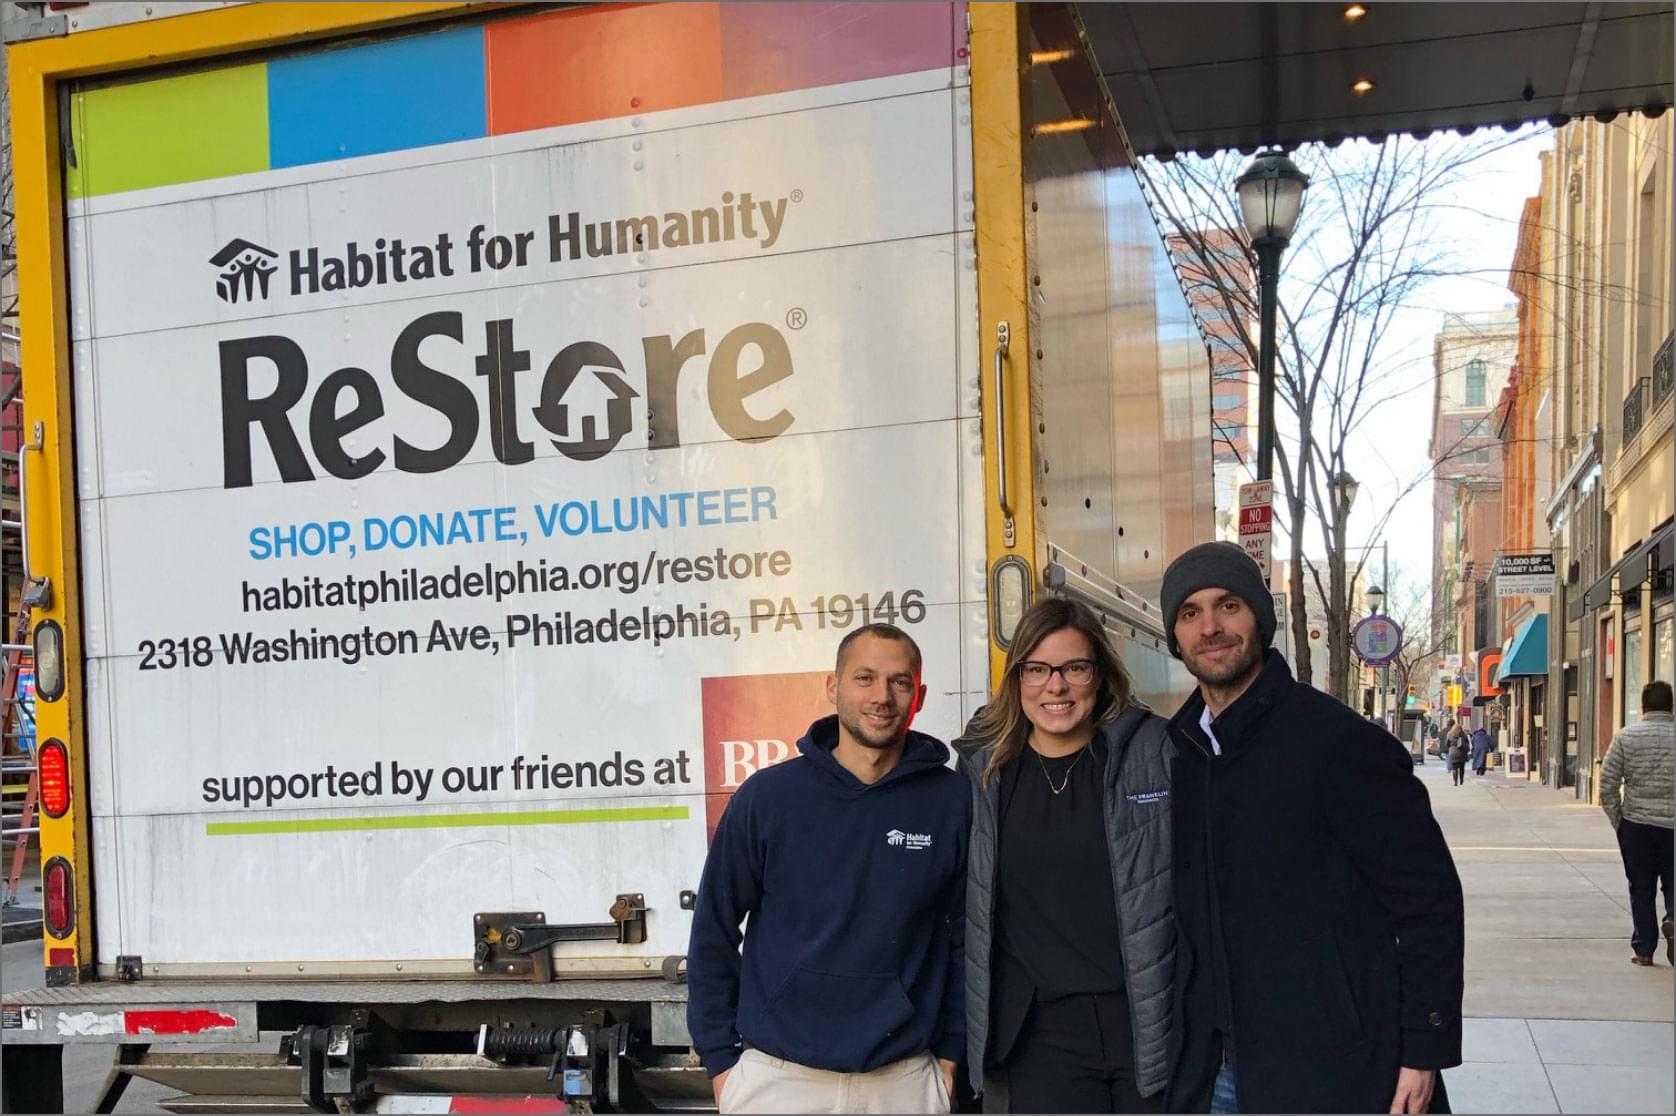 One woman, two men standing in front of moving truck on sidewalk for Habitat for Humanity ReStore 